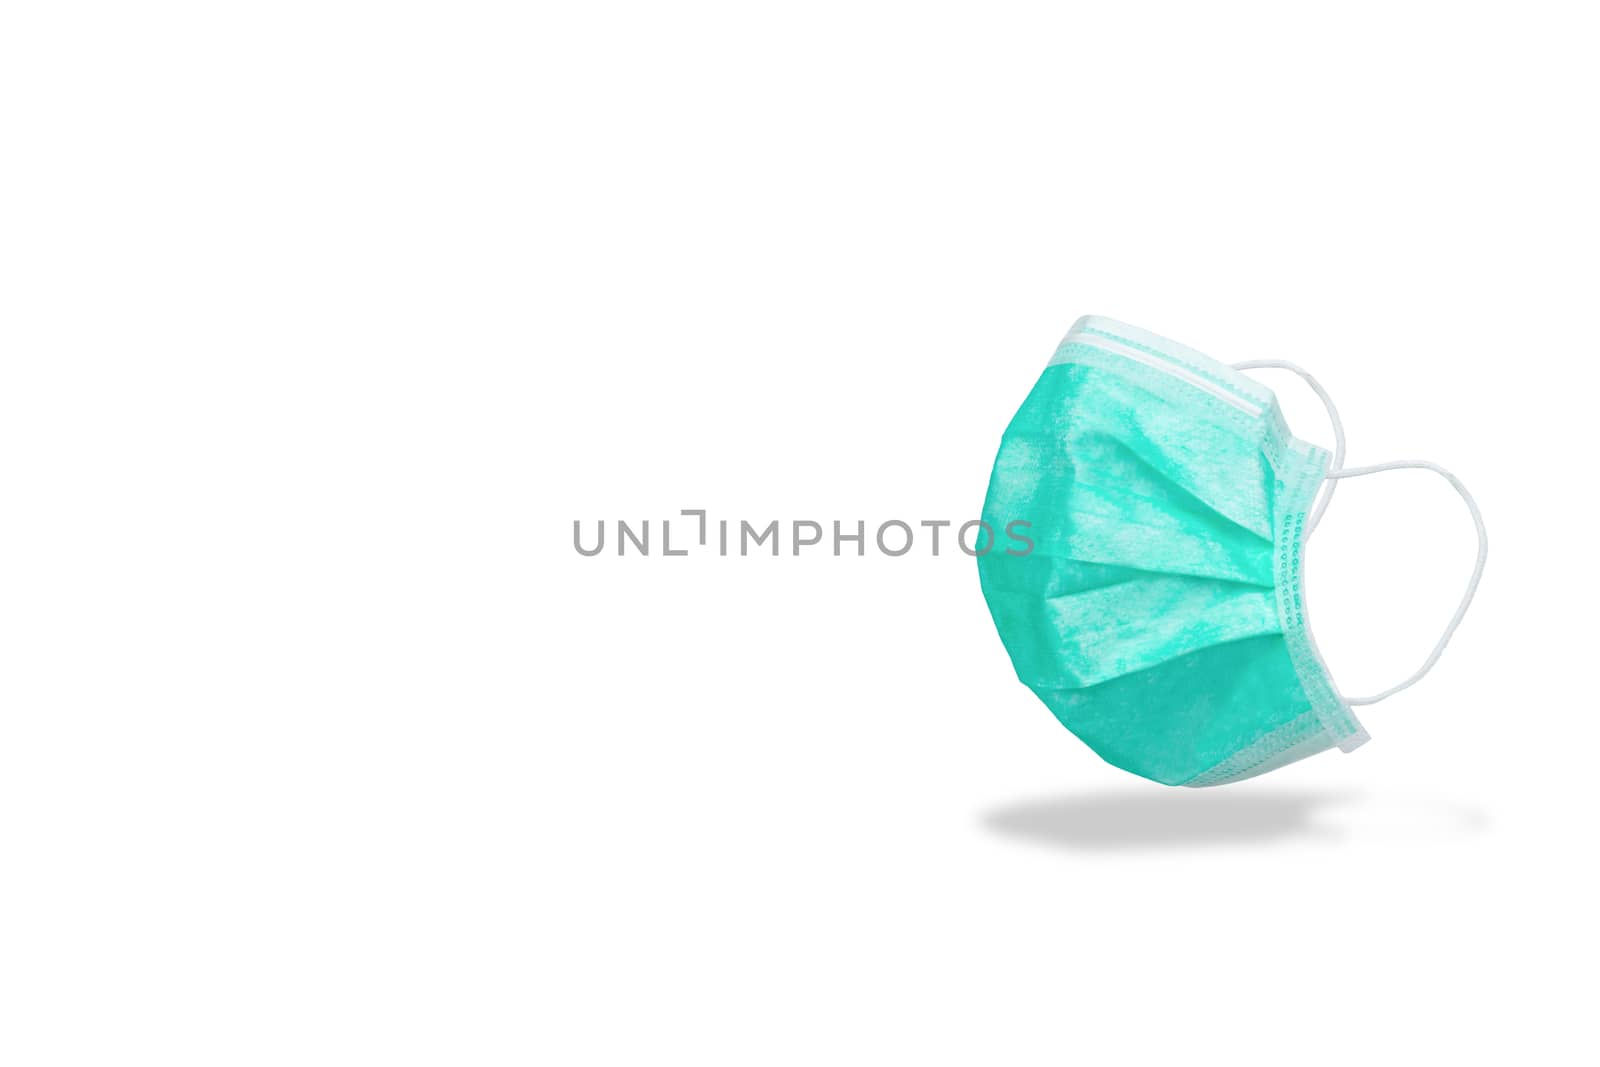 Mask virus protection on a white background by sompongtom